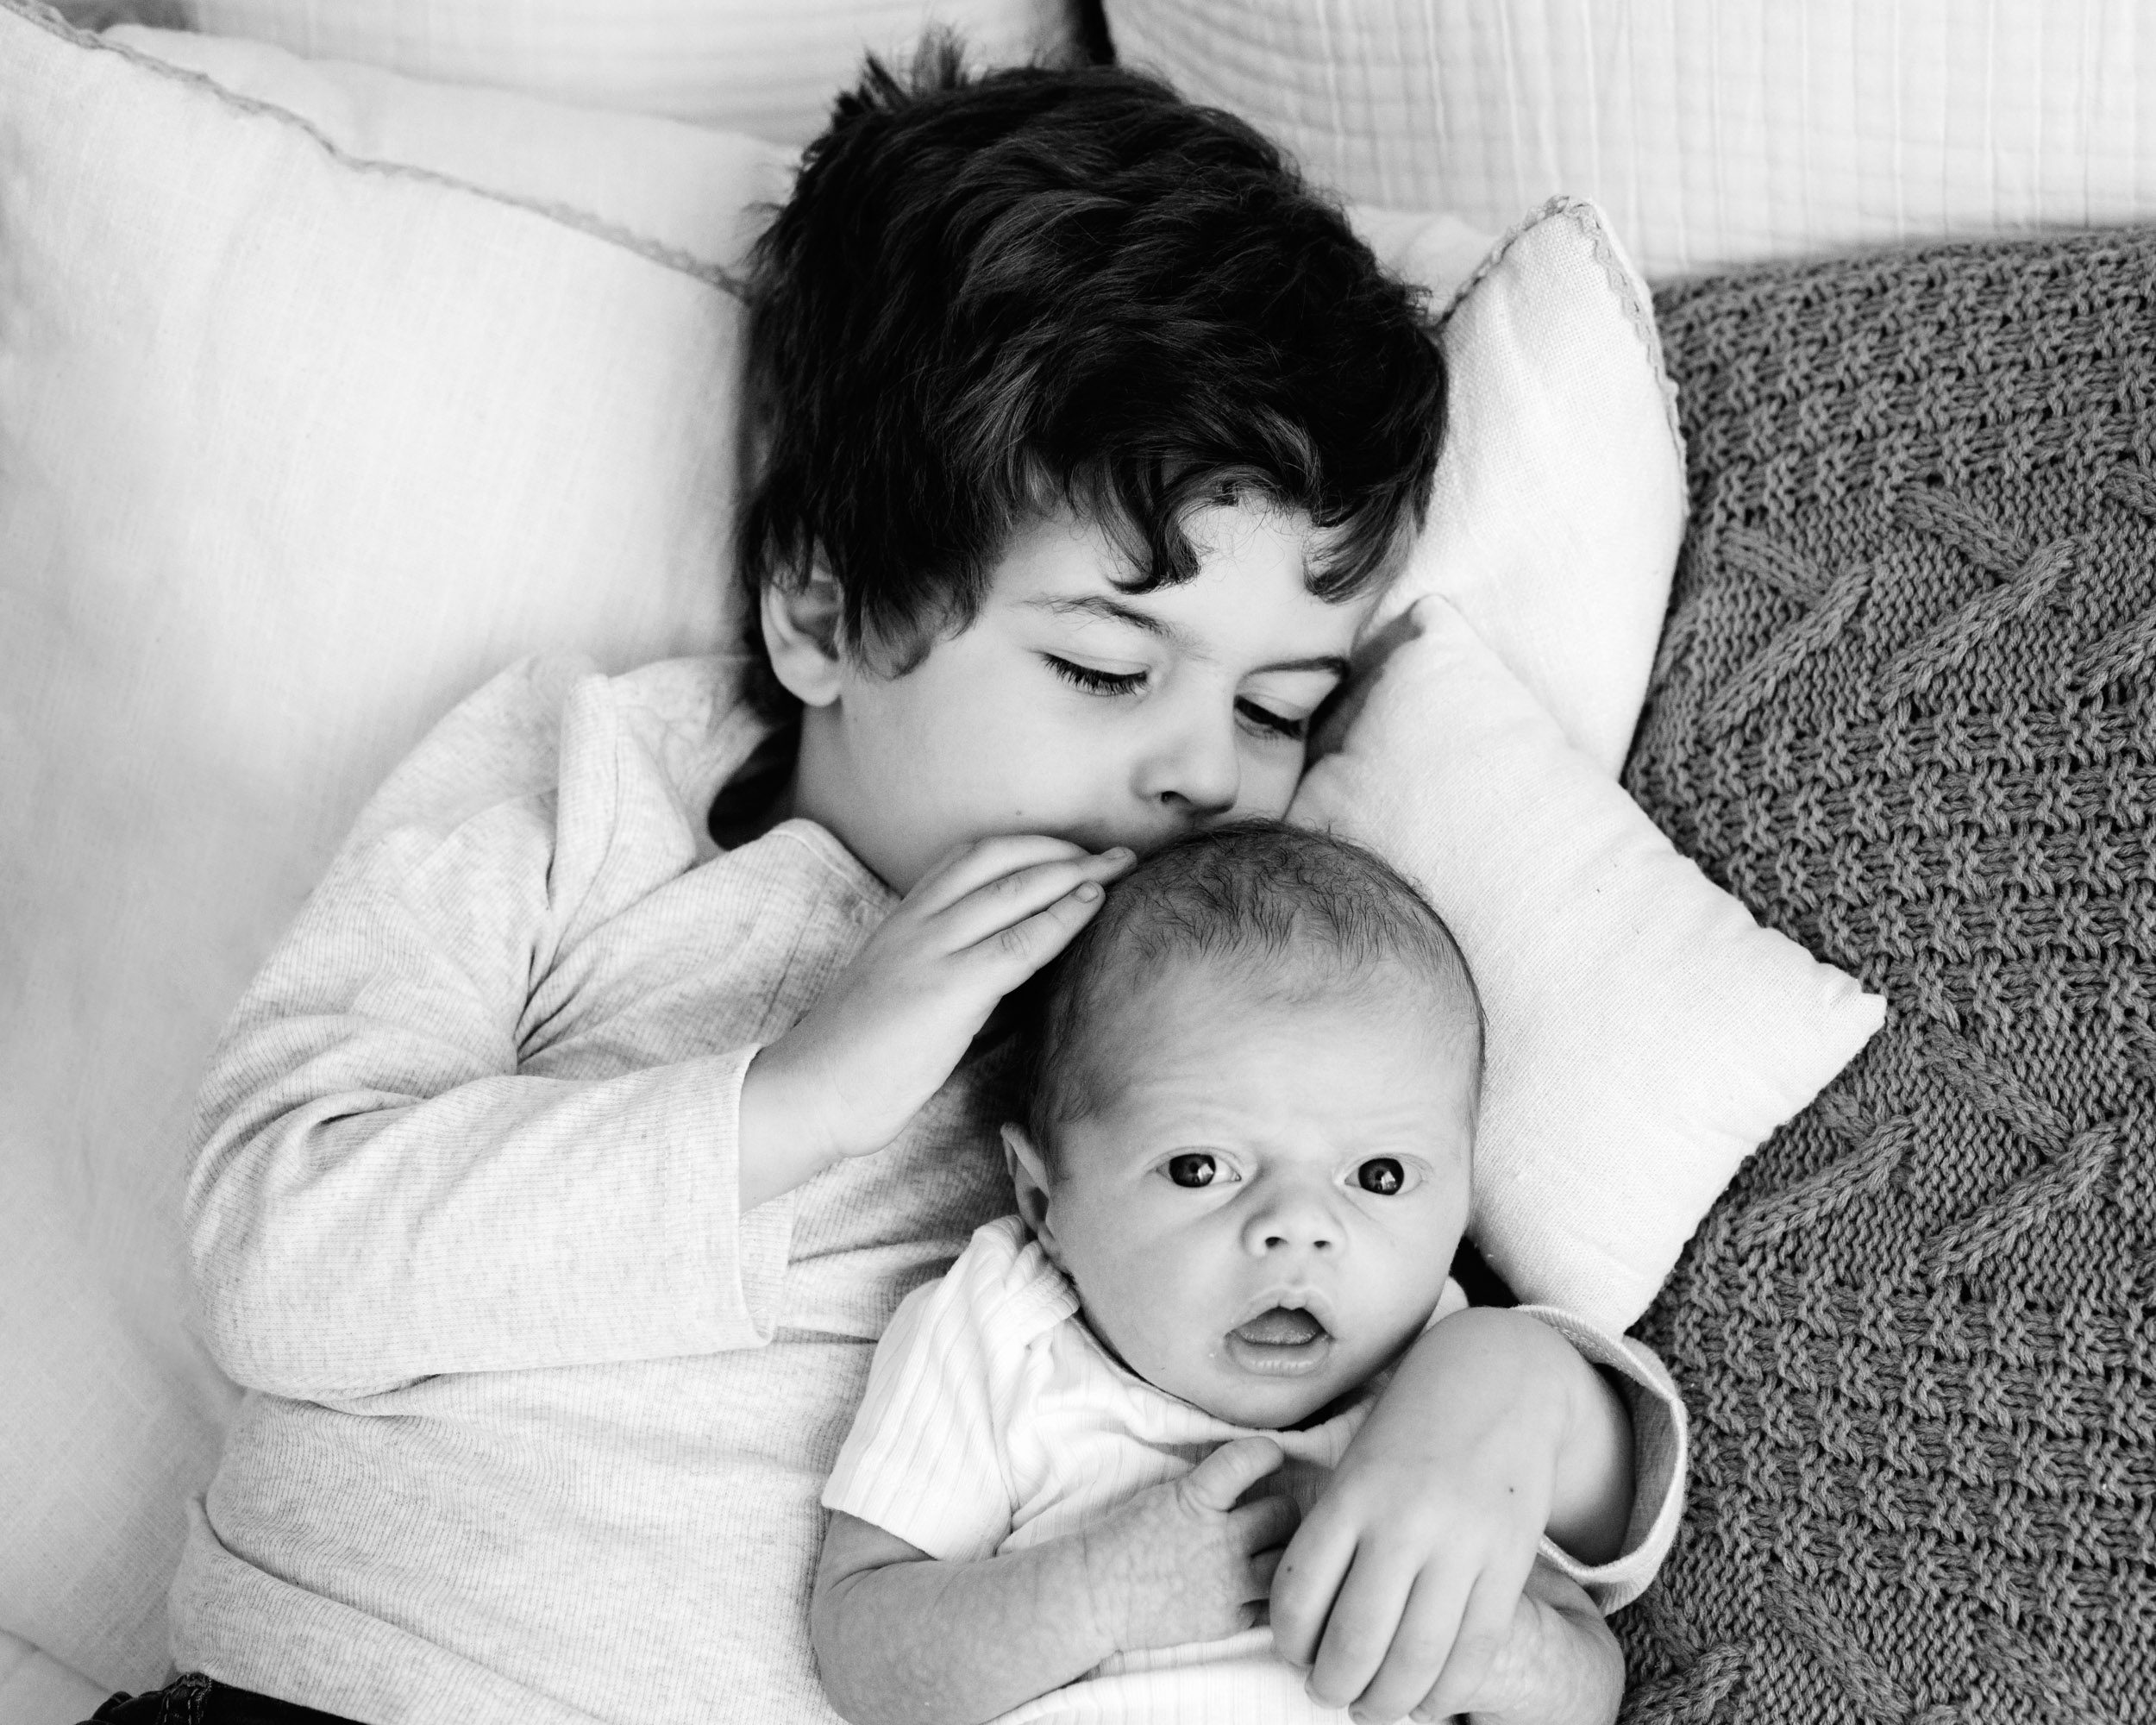 a black and white picture of a big brother laying on a bed and kissing his baby brother on the head while the baby looks directly at the camera during a newborn photoshoot